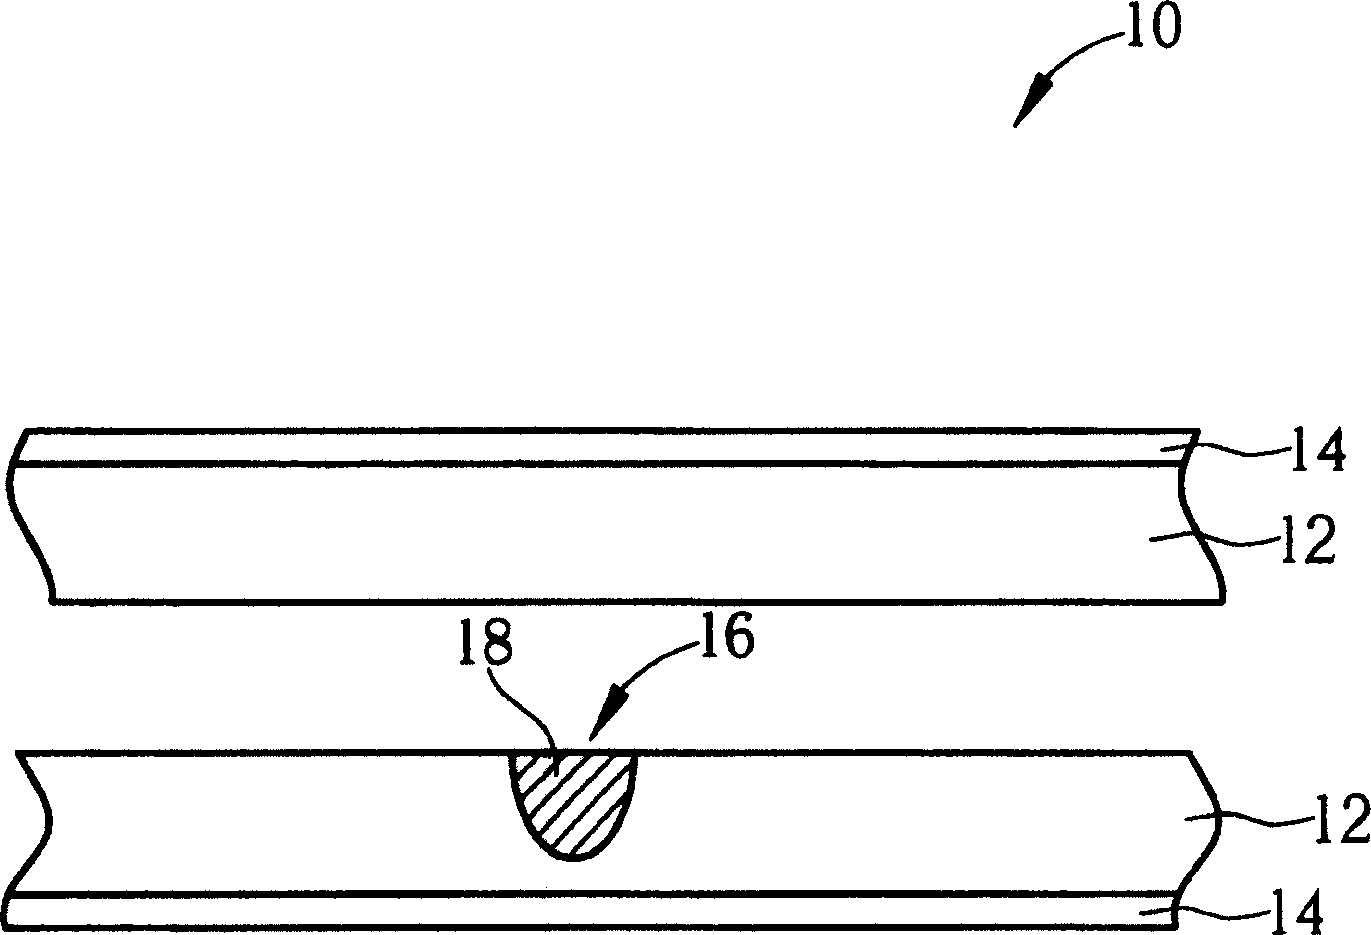 Method for repairing defects of electrode pattern